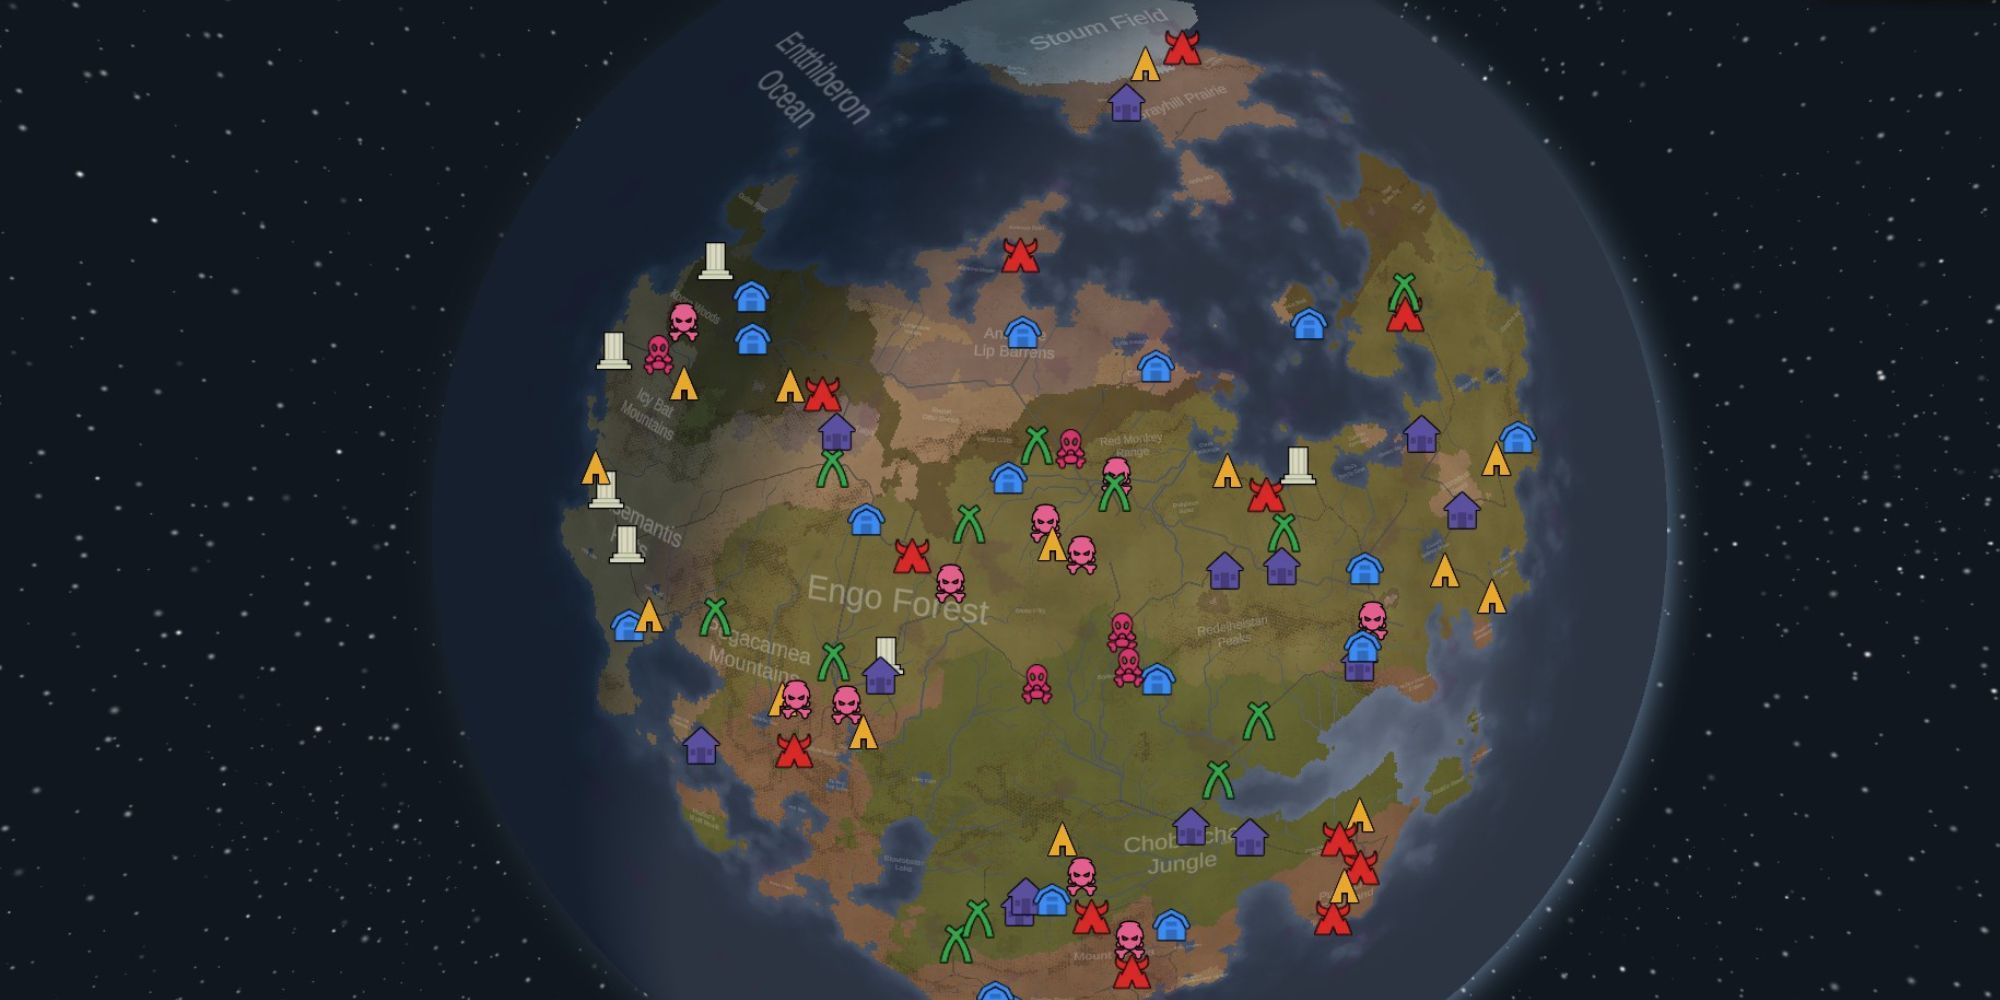 Selecting a place to land on the world map in Rimworld